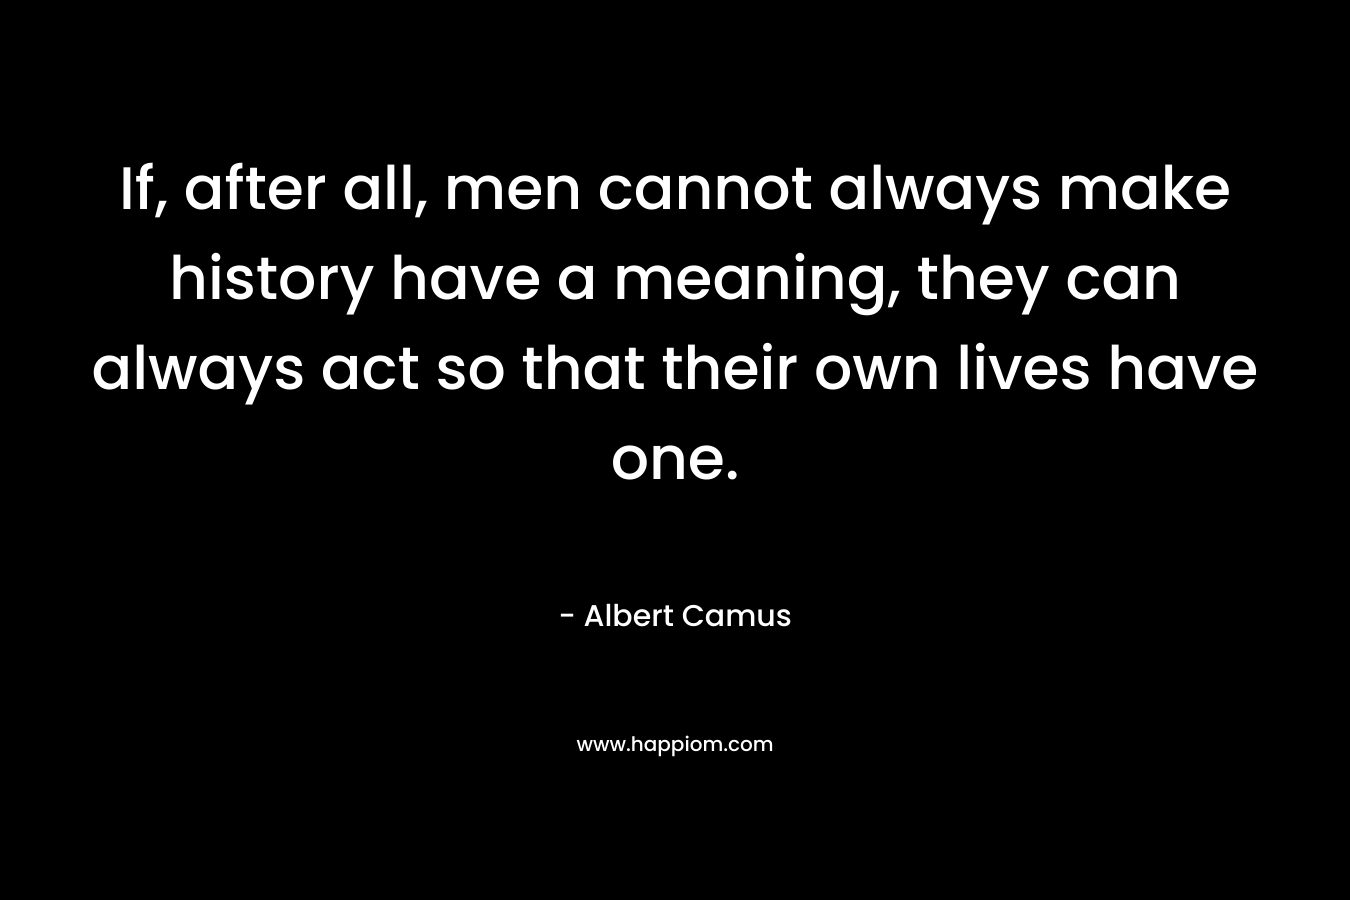 If, after all, men cannot always make history have a meaning, they can always act so that their own lives have one.